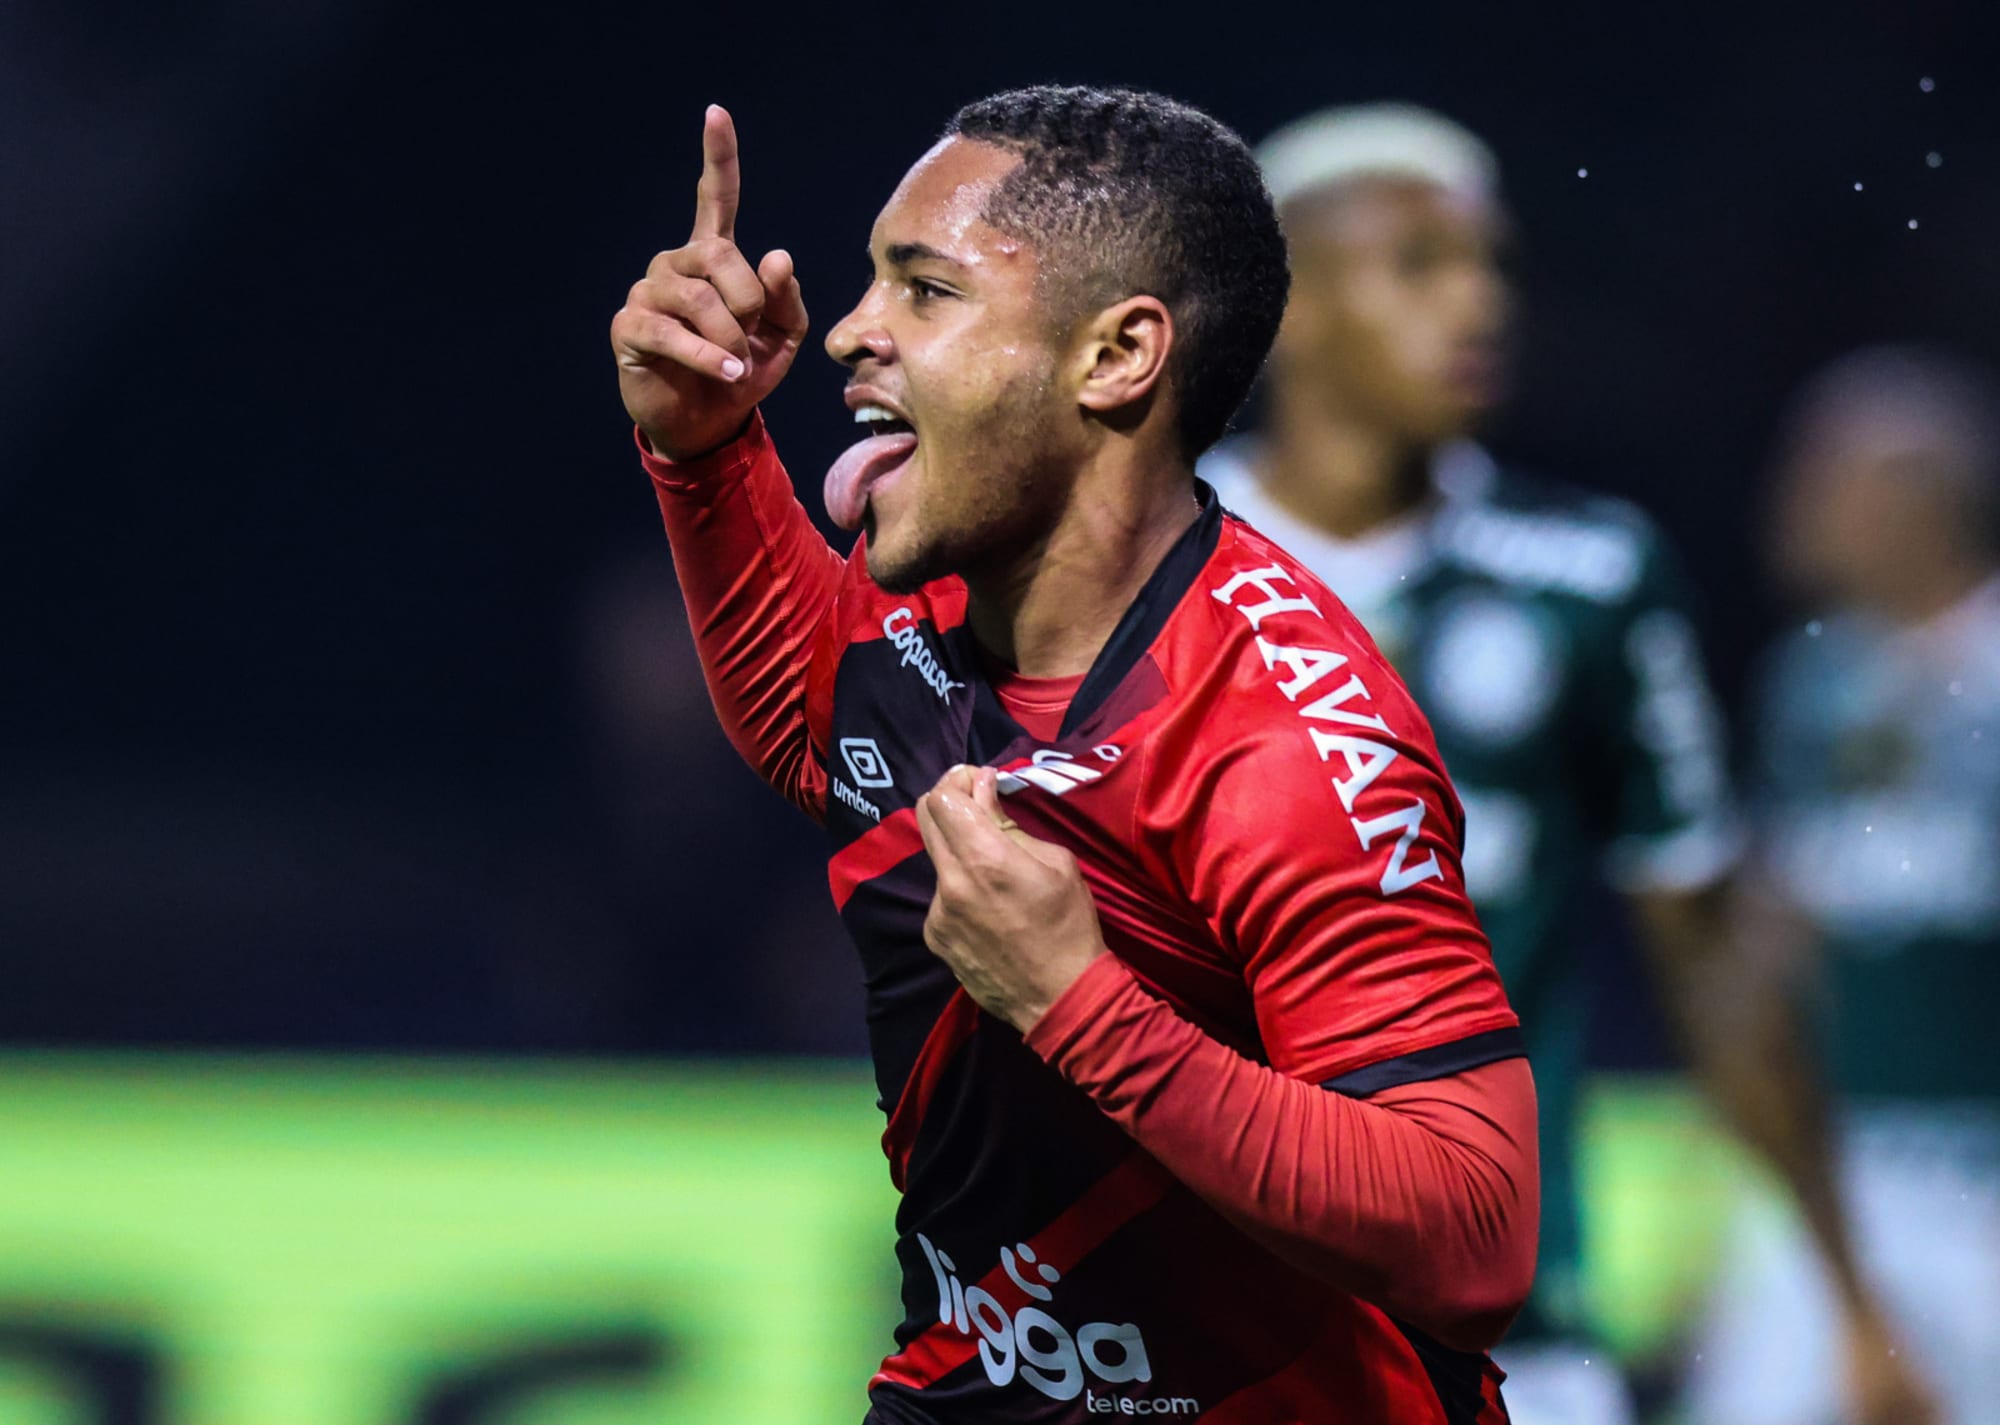 This stat shows Barça target Vitor Roque is on the way to becoming